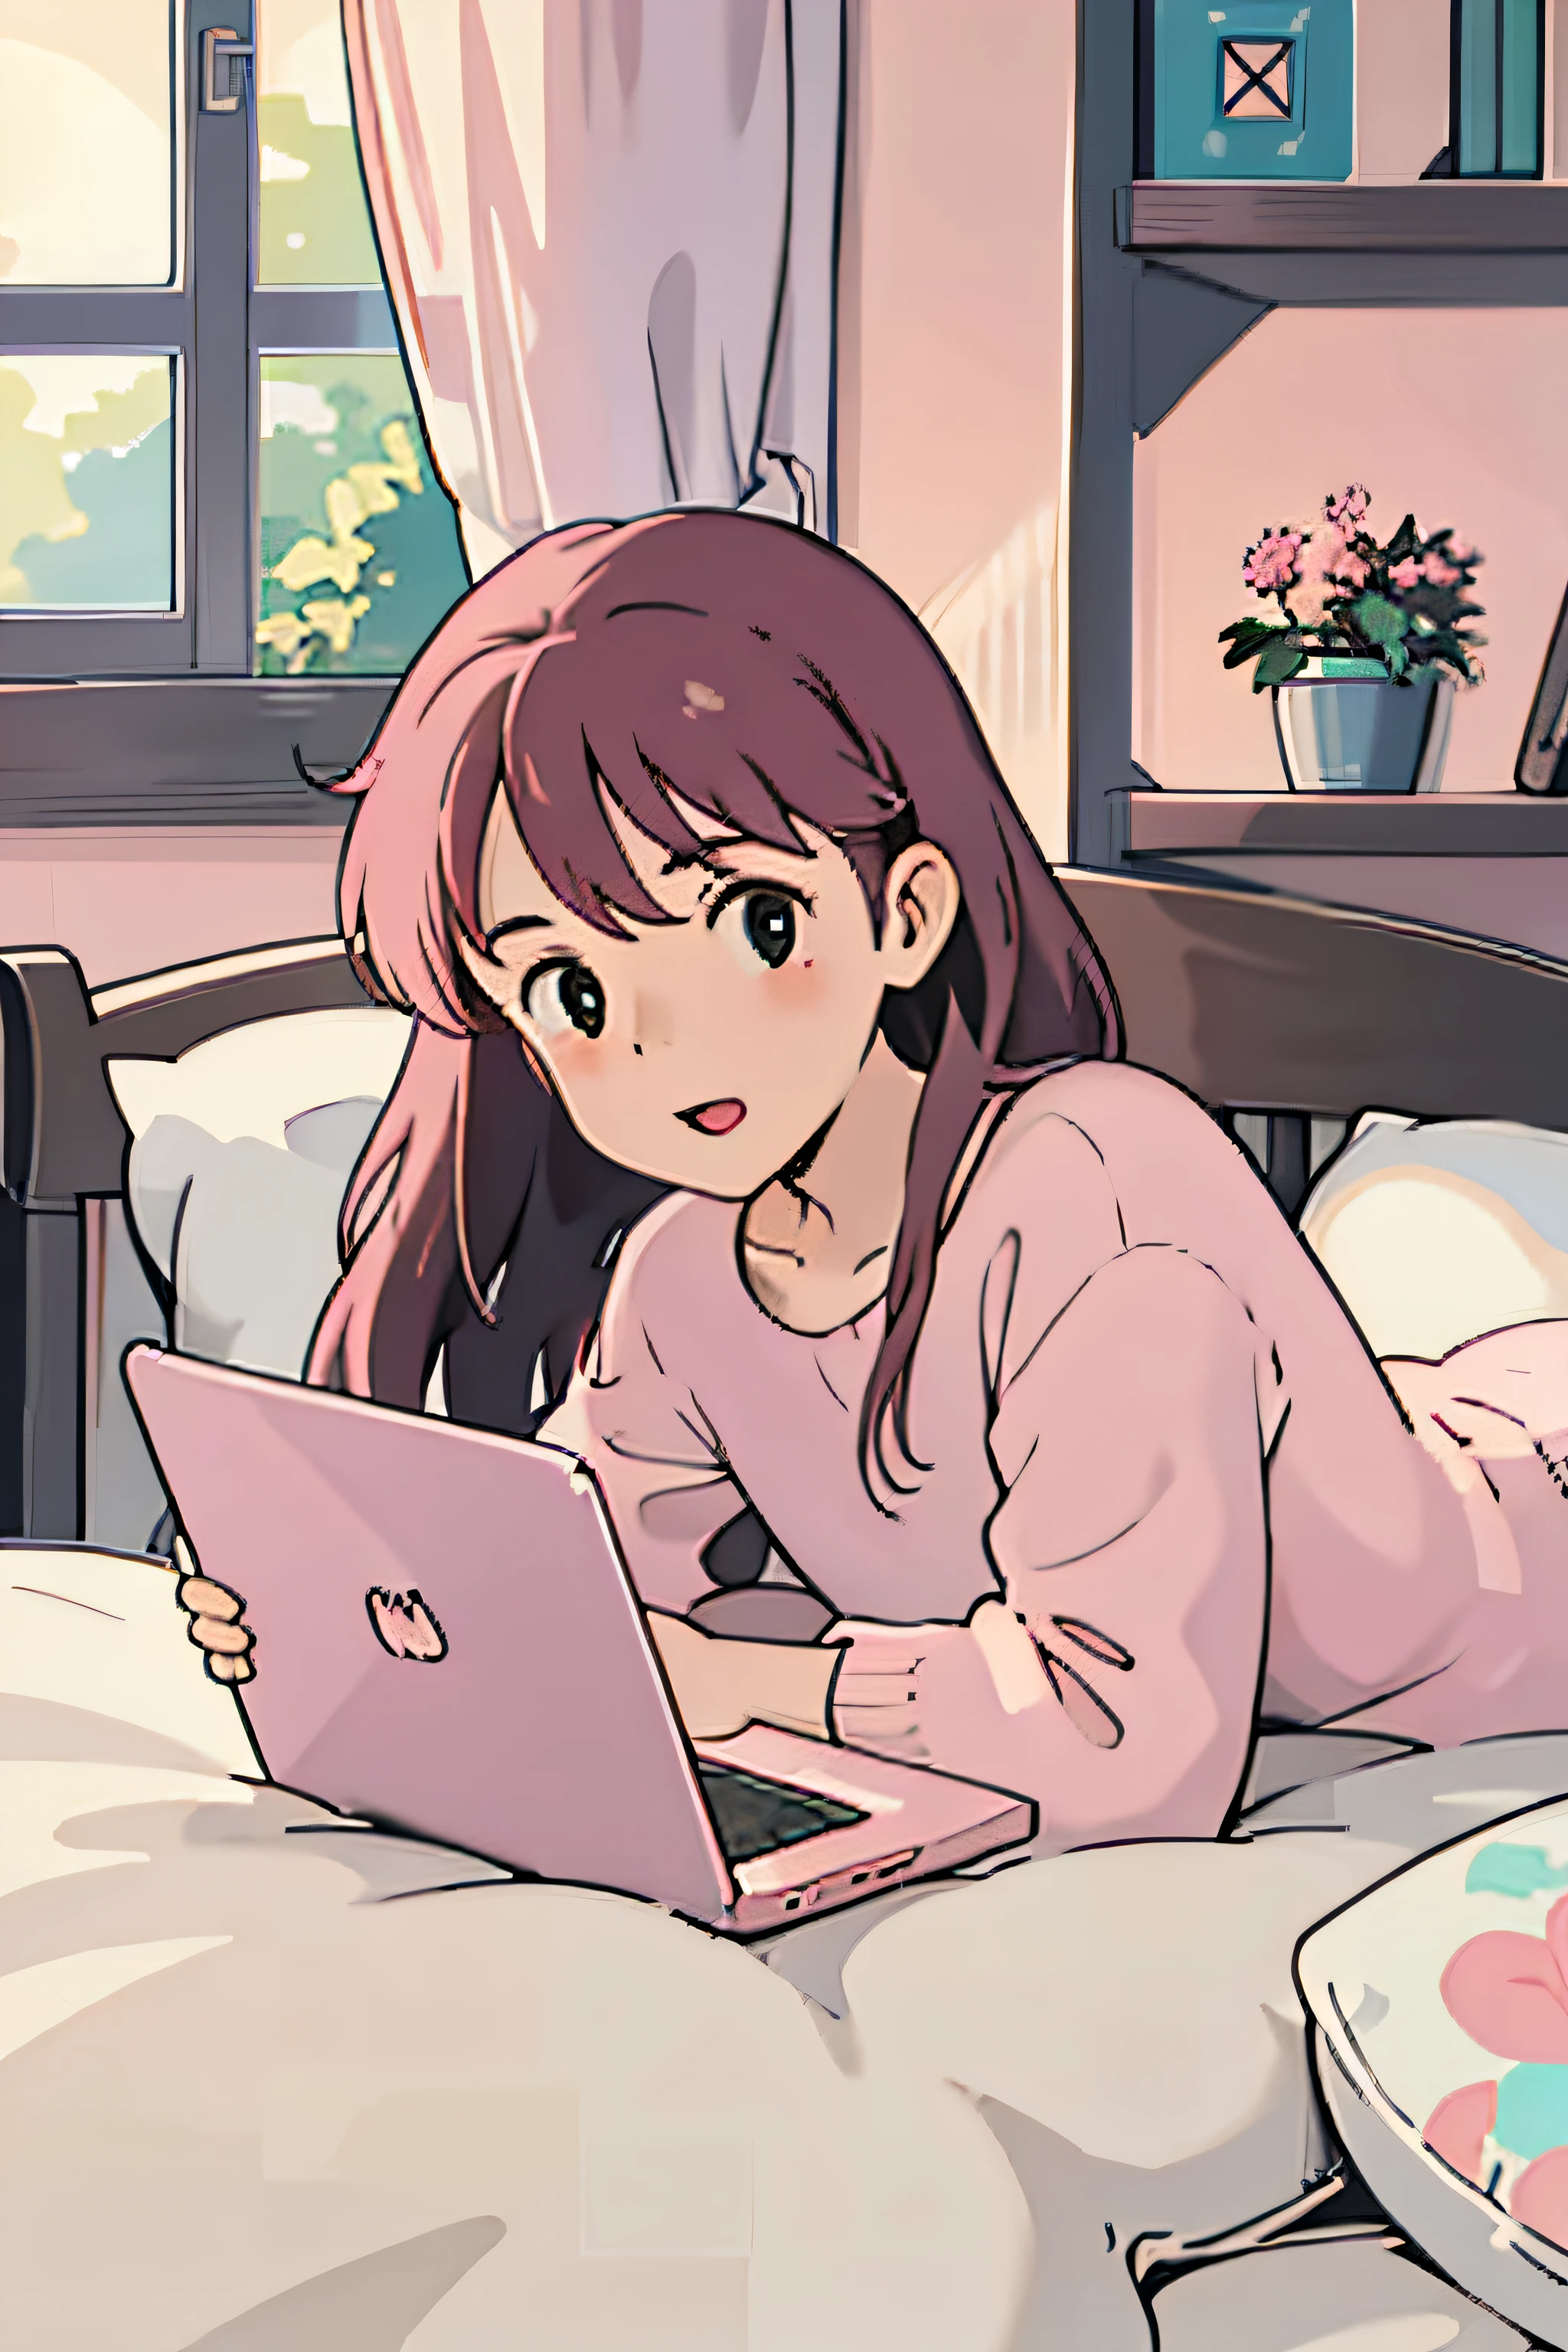 (Masterpiece: 1.4), (Best Quality: 1.4), (High Definition: 1.4), Girl, Pink Hair, Long Hair, One Girl, Lying in Bed, Laptop Open, Mobile, Houseplants, Bookcase, Lo-Fi,